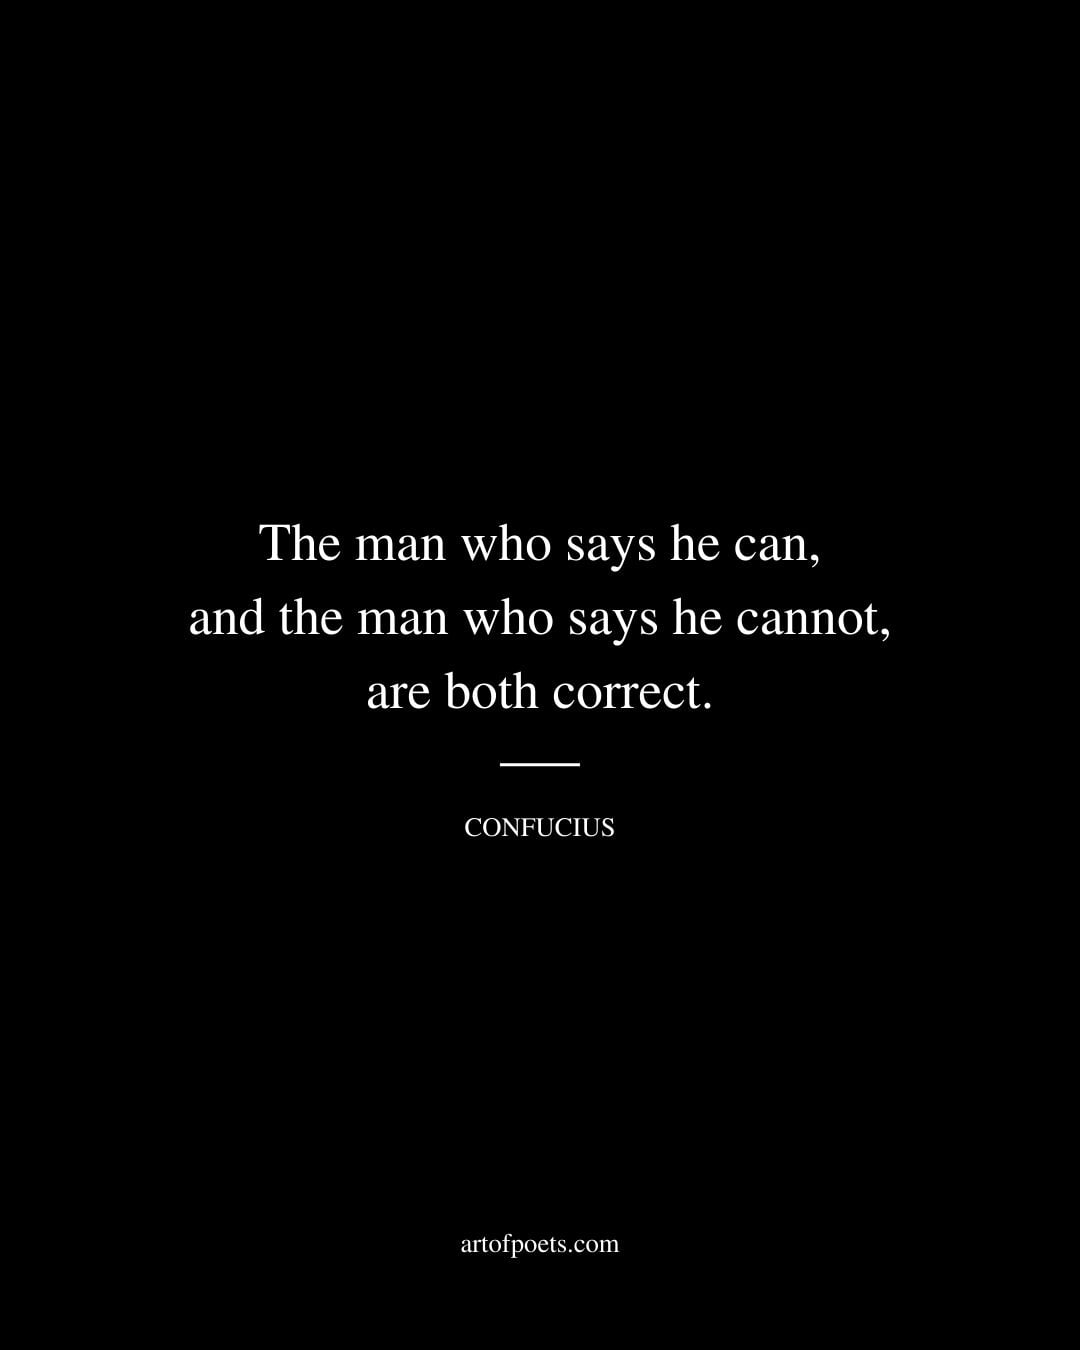 The man who says he can and the man who says he cannot… are both correct